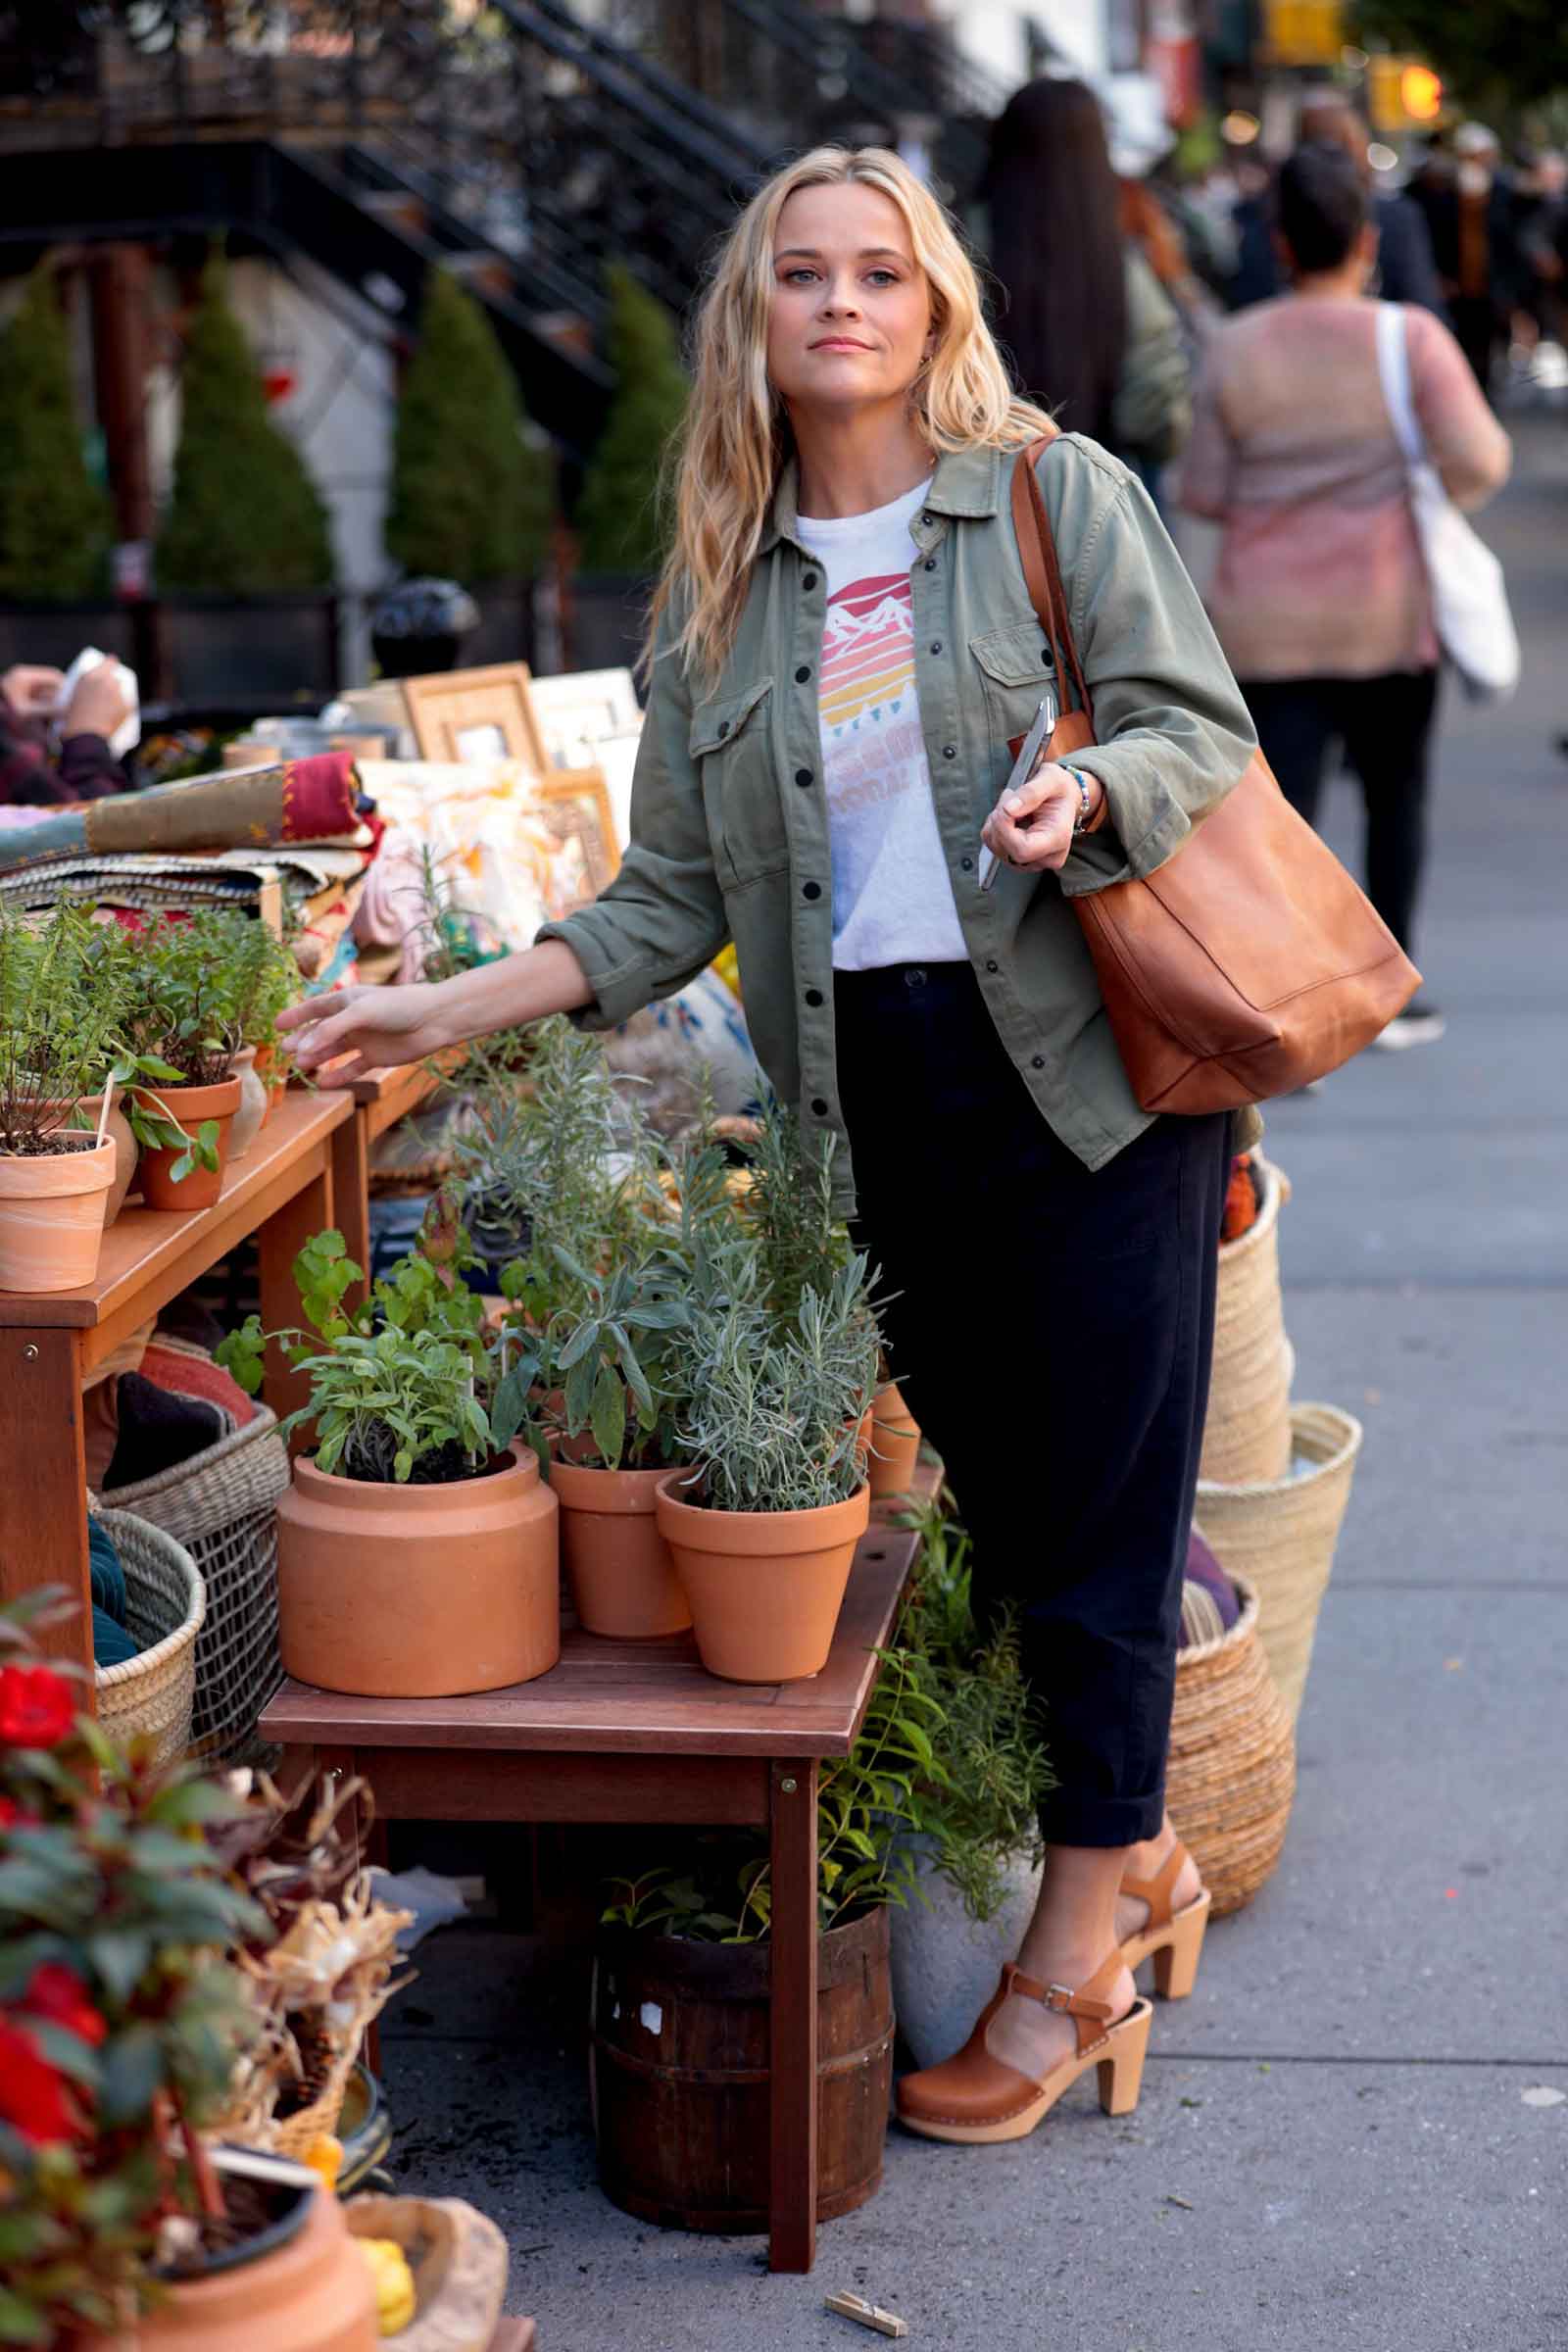 Reese Witherspoon looks cute and casual in an army green utility jacket, black pants, graphic tee and cognac accessories.